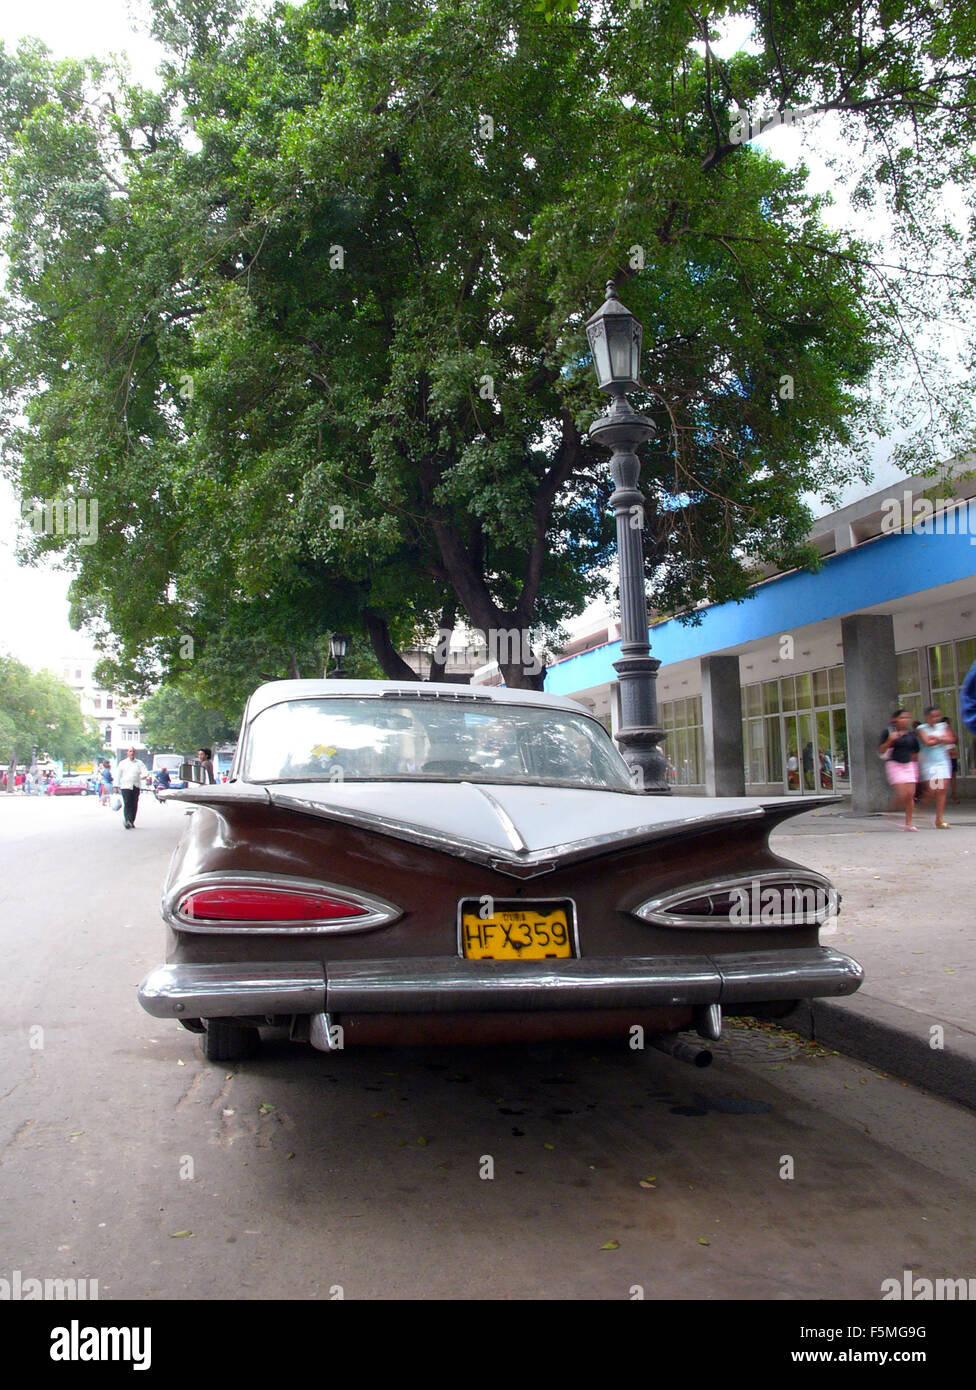 Feb 15, 2006; Havana, CUBA; One of many Cuban Maquinas, aka Yank tanks or pre 1960 American Classic cars in the streets of Havana. One in eight cars in Cuba today is a pre-1960s American brand Ford, Chevrolet, Cadillac, Chrysler, Packard and other classic models. The Republic of Cuba is located in the northern Caribbean and south of the United States. The first European to visit Cuba was explorer Christopher Columbus in 1492. Centuries of colonial rule and revolutions followed. Batista was deposed by Fidel Castro and Che guevara in 1953. After the revolution trade with comminist Russia grew. T Stock Photo